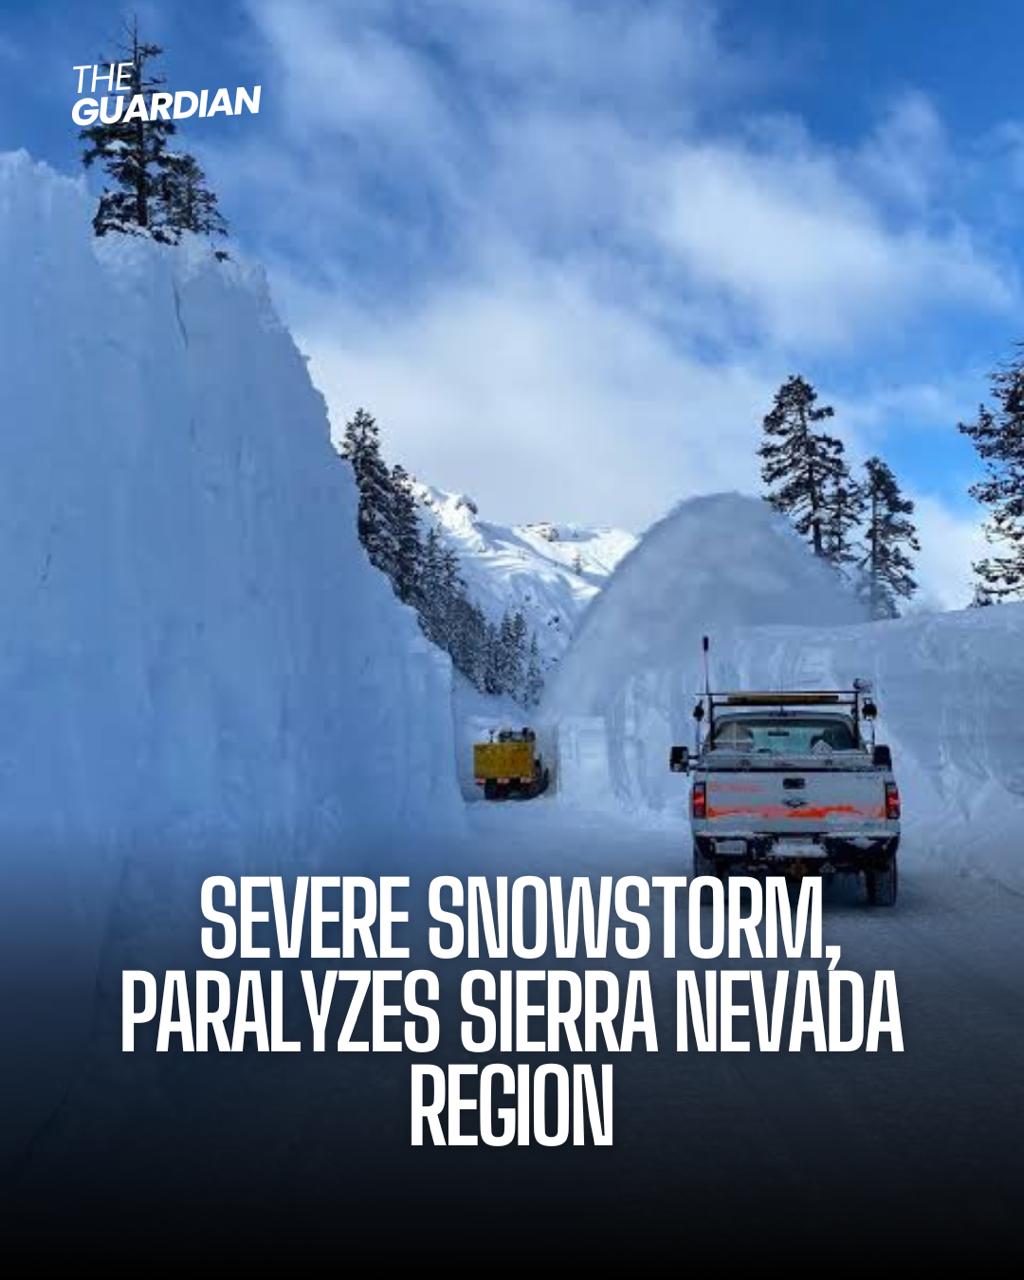 A massive blizzard is battering areas of California and Nevada in the western United States.